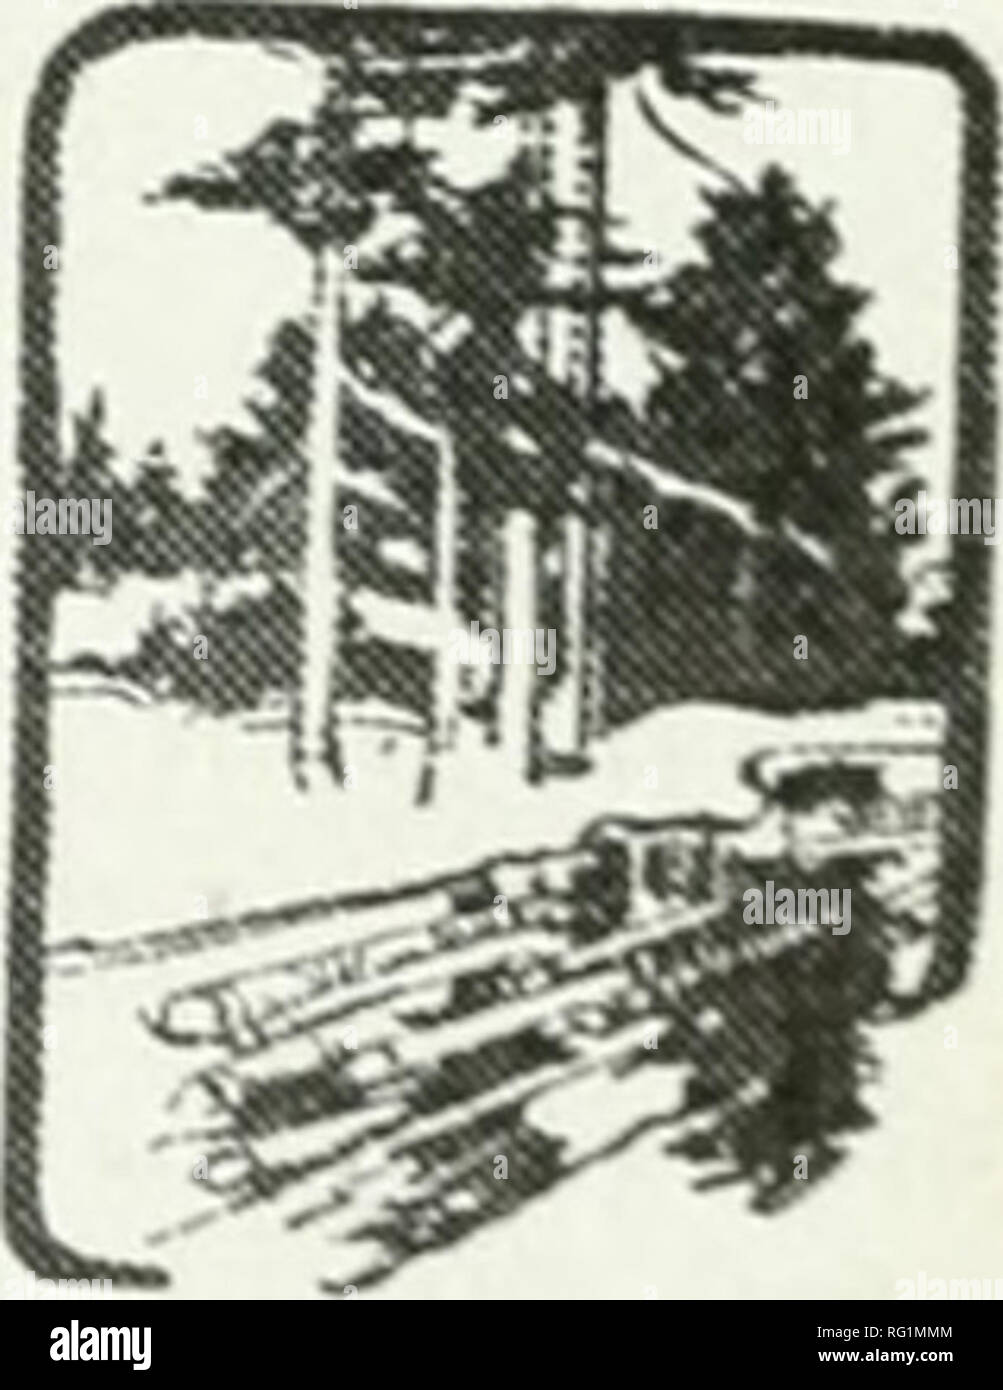 . Canadian forestry journal. Forests and forestry -- Canada Periodicals. By W. W. Colton, City Forester of Nexvion, Mass., U.S.A. How to Estimate Compensation for Ruined Trees.—One Dollar an Inch of Basal Area.. How are we to determine the value of our individual shade trees? It is generally admitted that shade trees are valuable not only from an economic standpoint, but also from their aesthetic, historic and phys- ical properties, but as my purpose is to show that there must be some definite method of de- termining their value, I am going to consider only the economic value. The development  Stock Photo